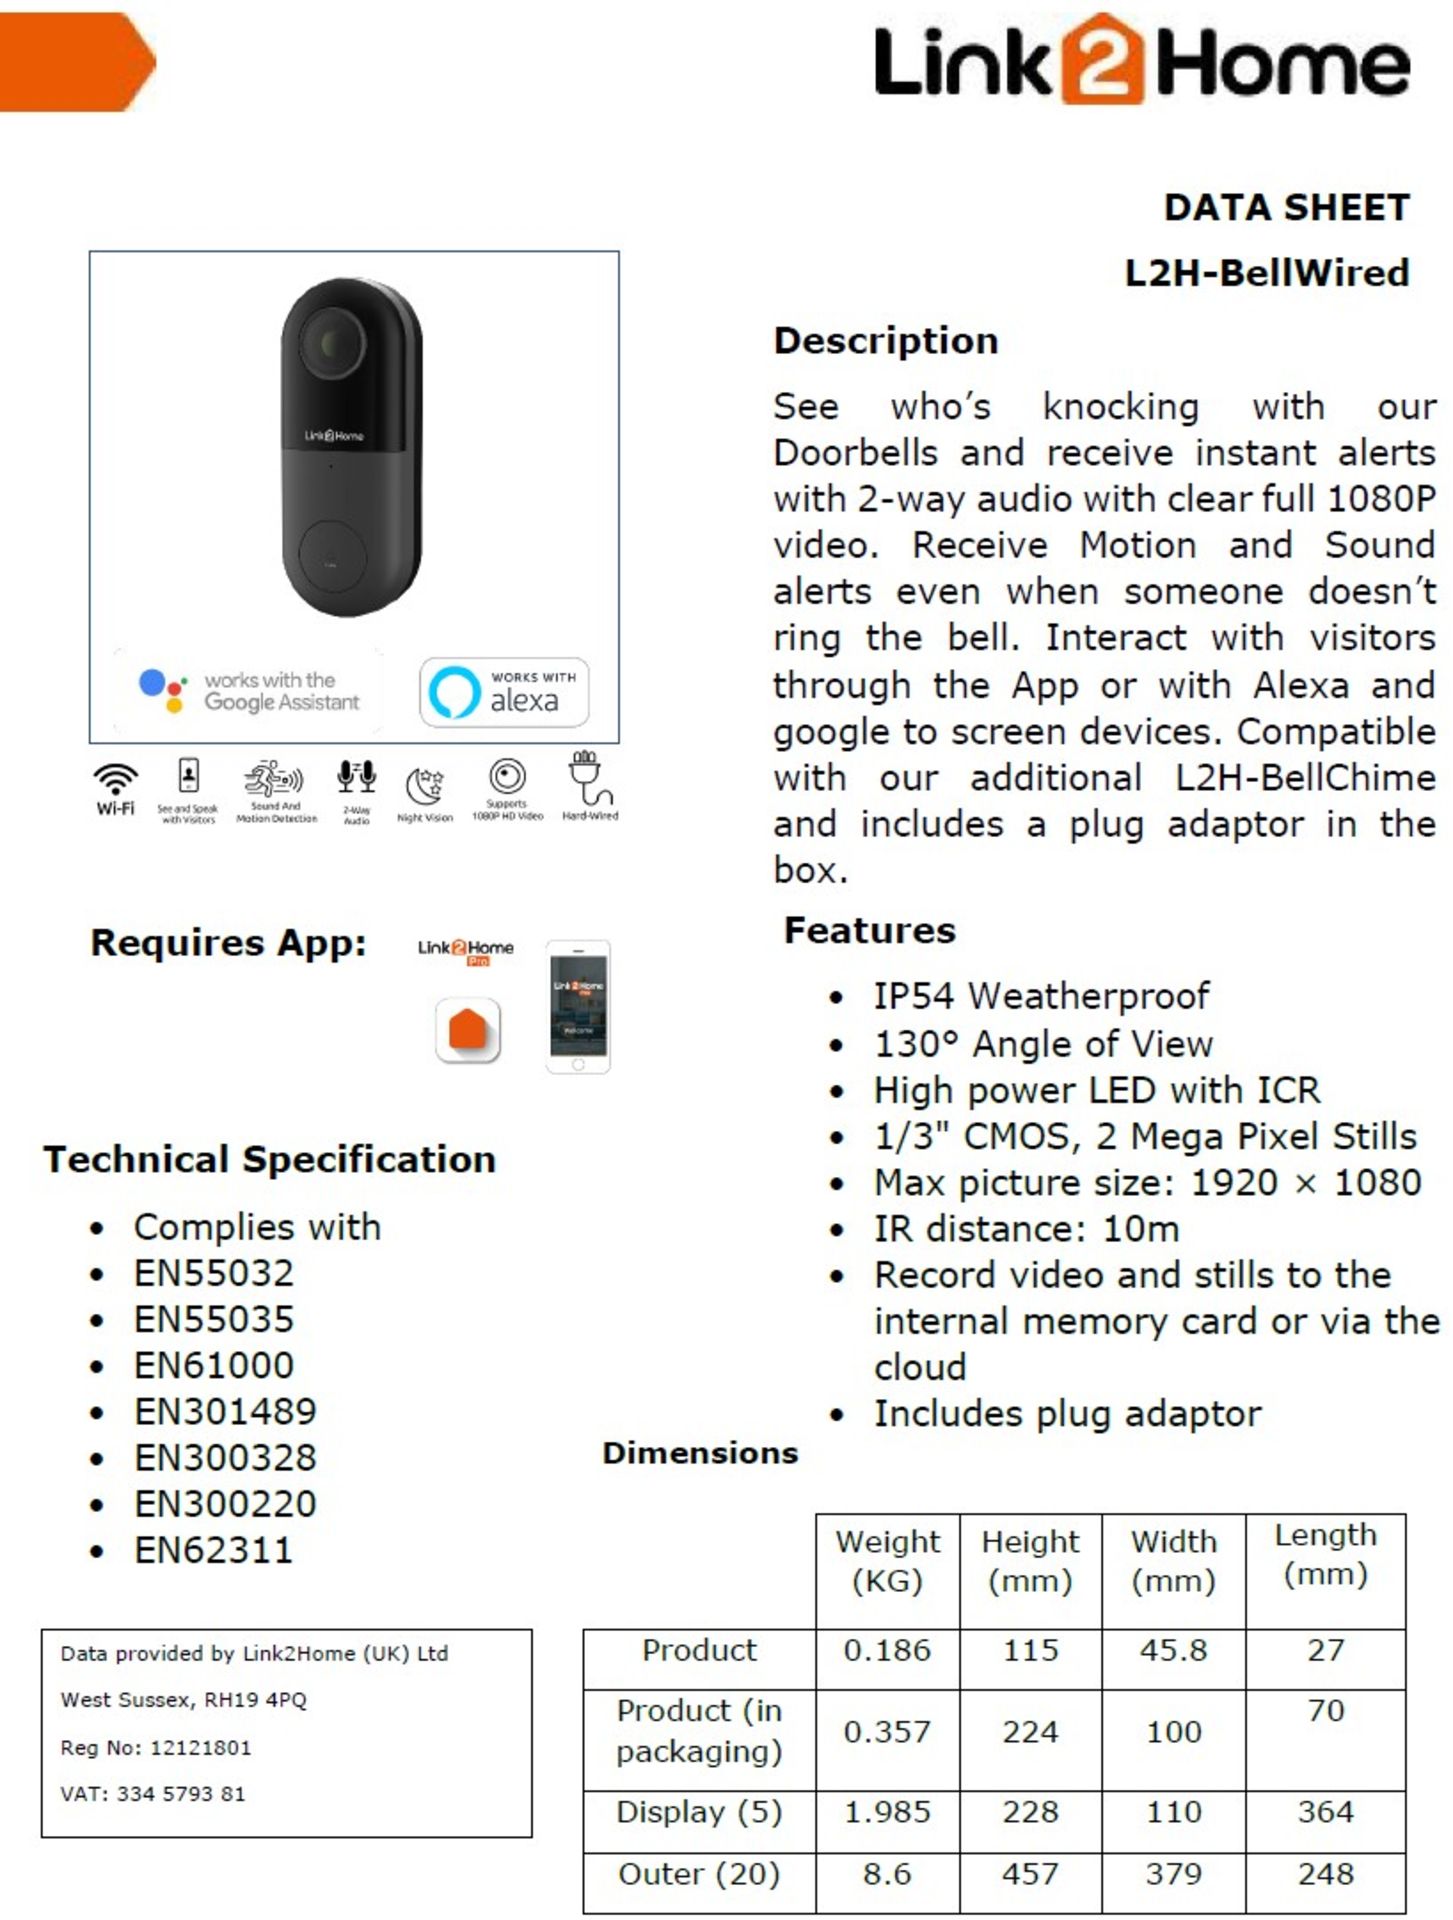 5 x Link2Home 'L2H BellWired' Hard Wired Doorbell/Cameras - New, boxed stock RRP £99. - Image 9 of 15